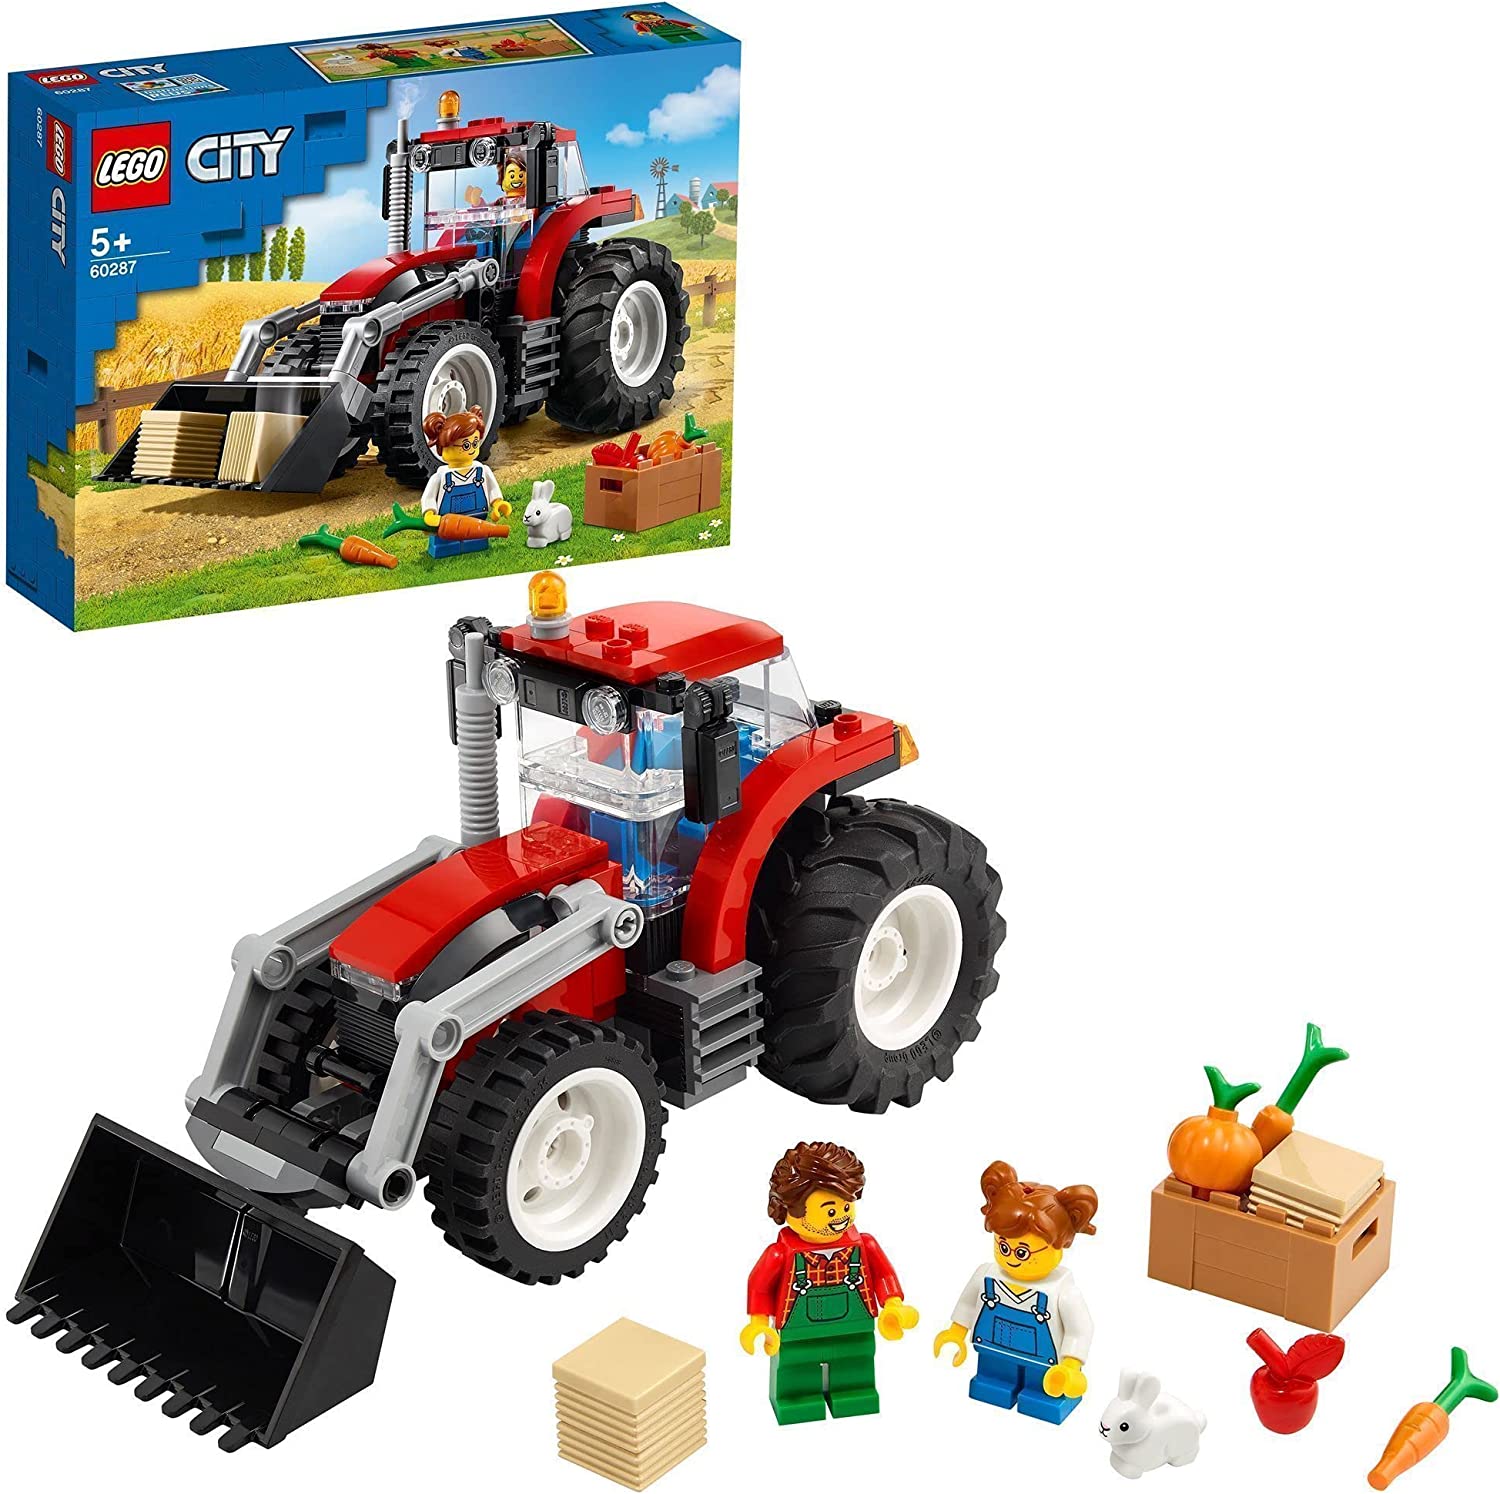 Lego 60287 City Tractor Toy Farm Set with Rabbit Figure for 5 Years Old Boys and Girls